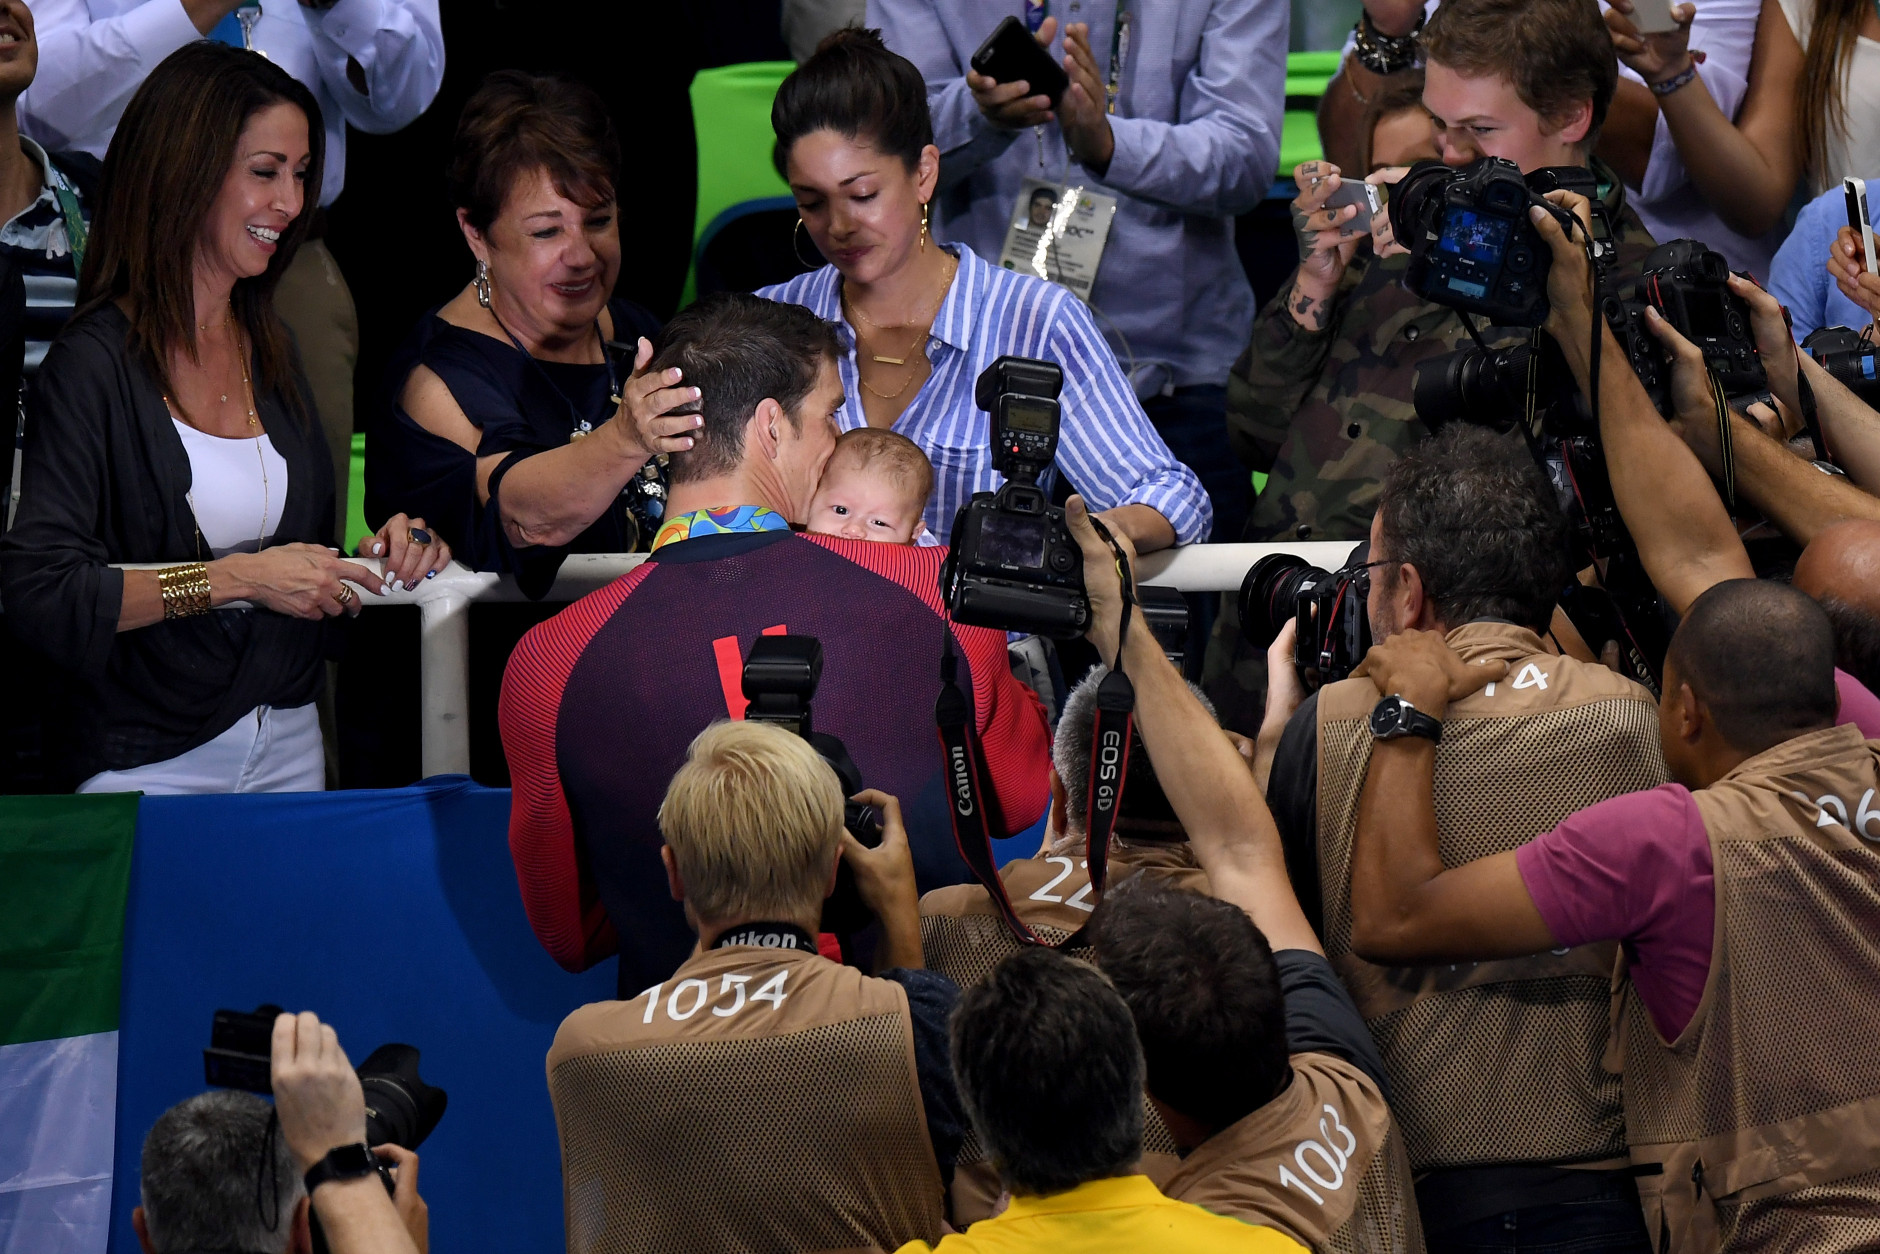 RIO DE JANEIRO, BRAZIL - AUGUST 09:  Gold medalist Michael Phelps of the United States celebrates with his mother Deborah Phelps, fiancee Nicole Johnson and son Boomer during the medal ceremony for the Men's 200m Butterfly Final on Day 4 of the Rio 2016 Olympic Games at the Olympic Aquatics Stadium on August 9, 2016 in Rio de Janeiro, Brazil.  (Photo by David Ramos/Getty Images)